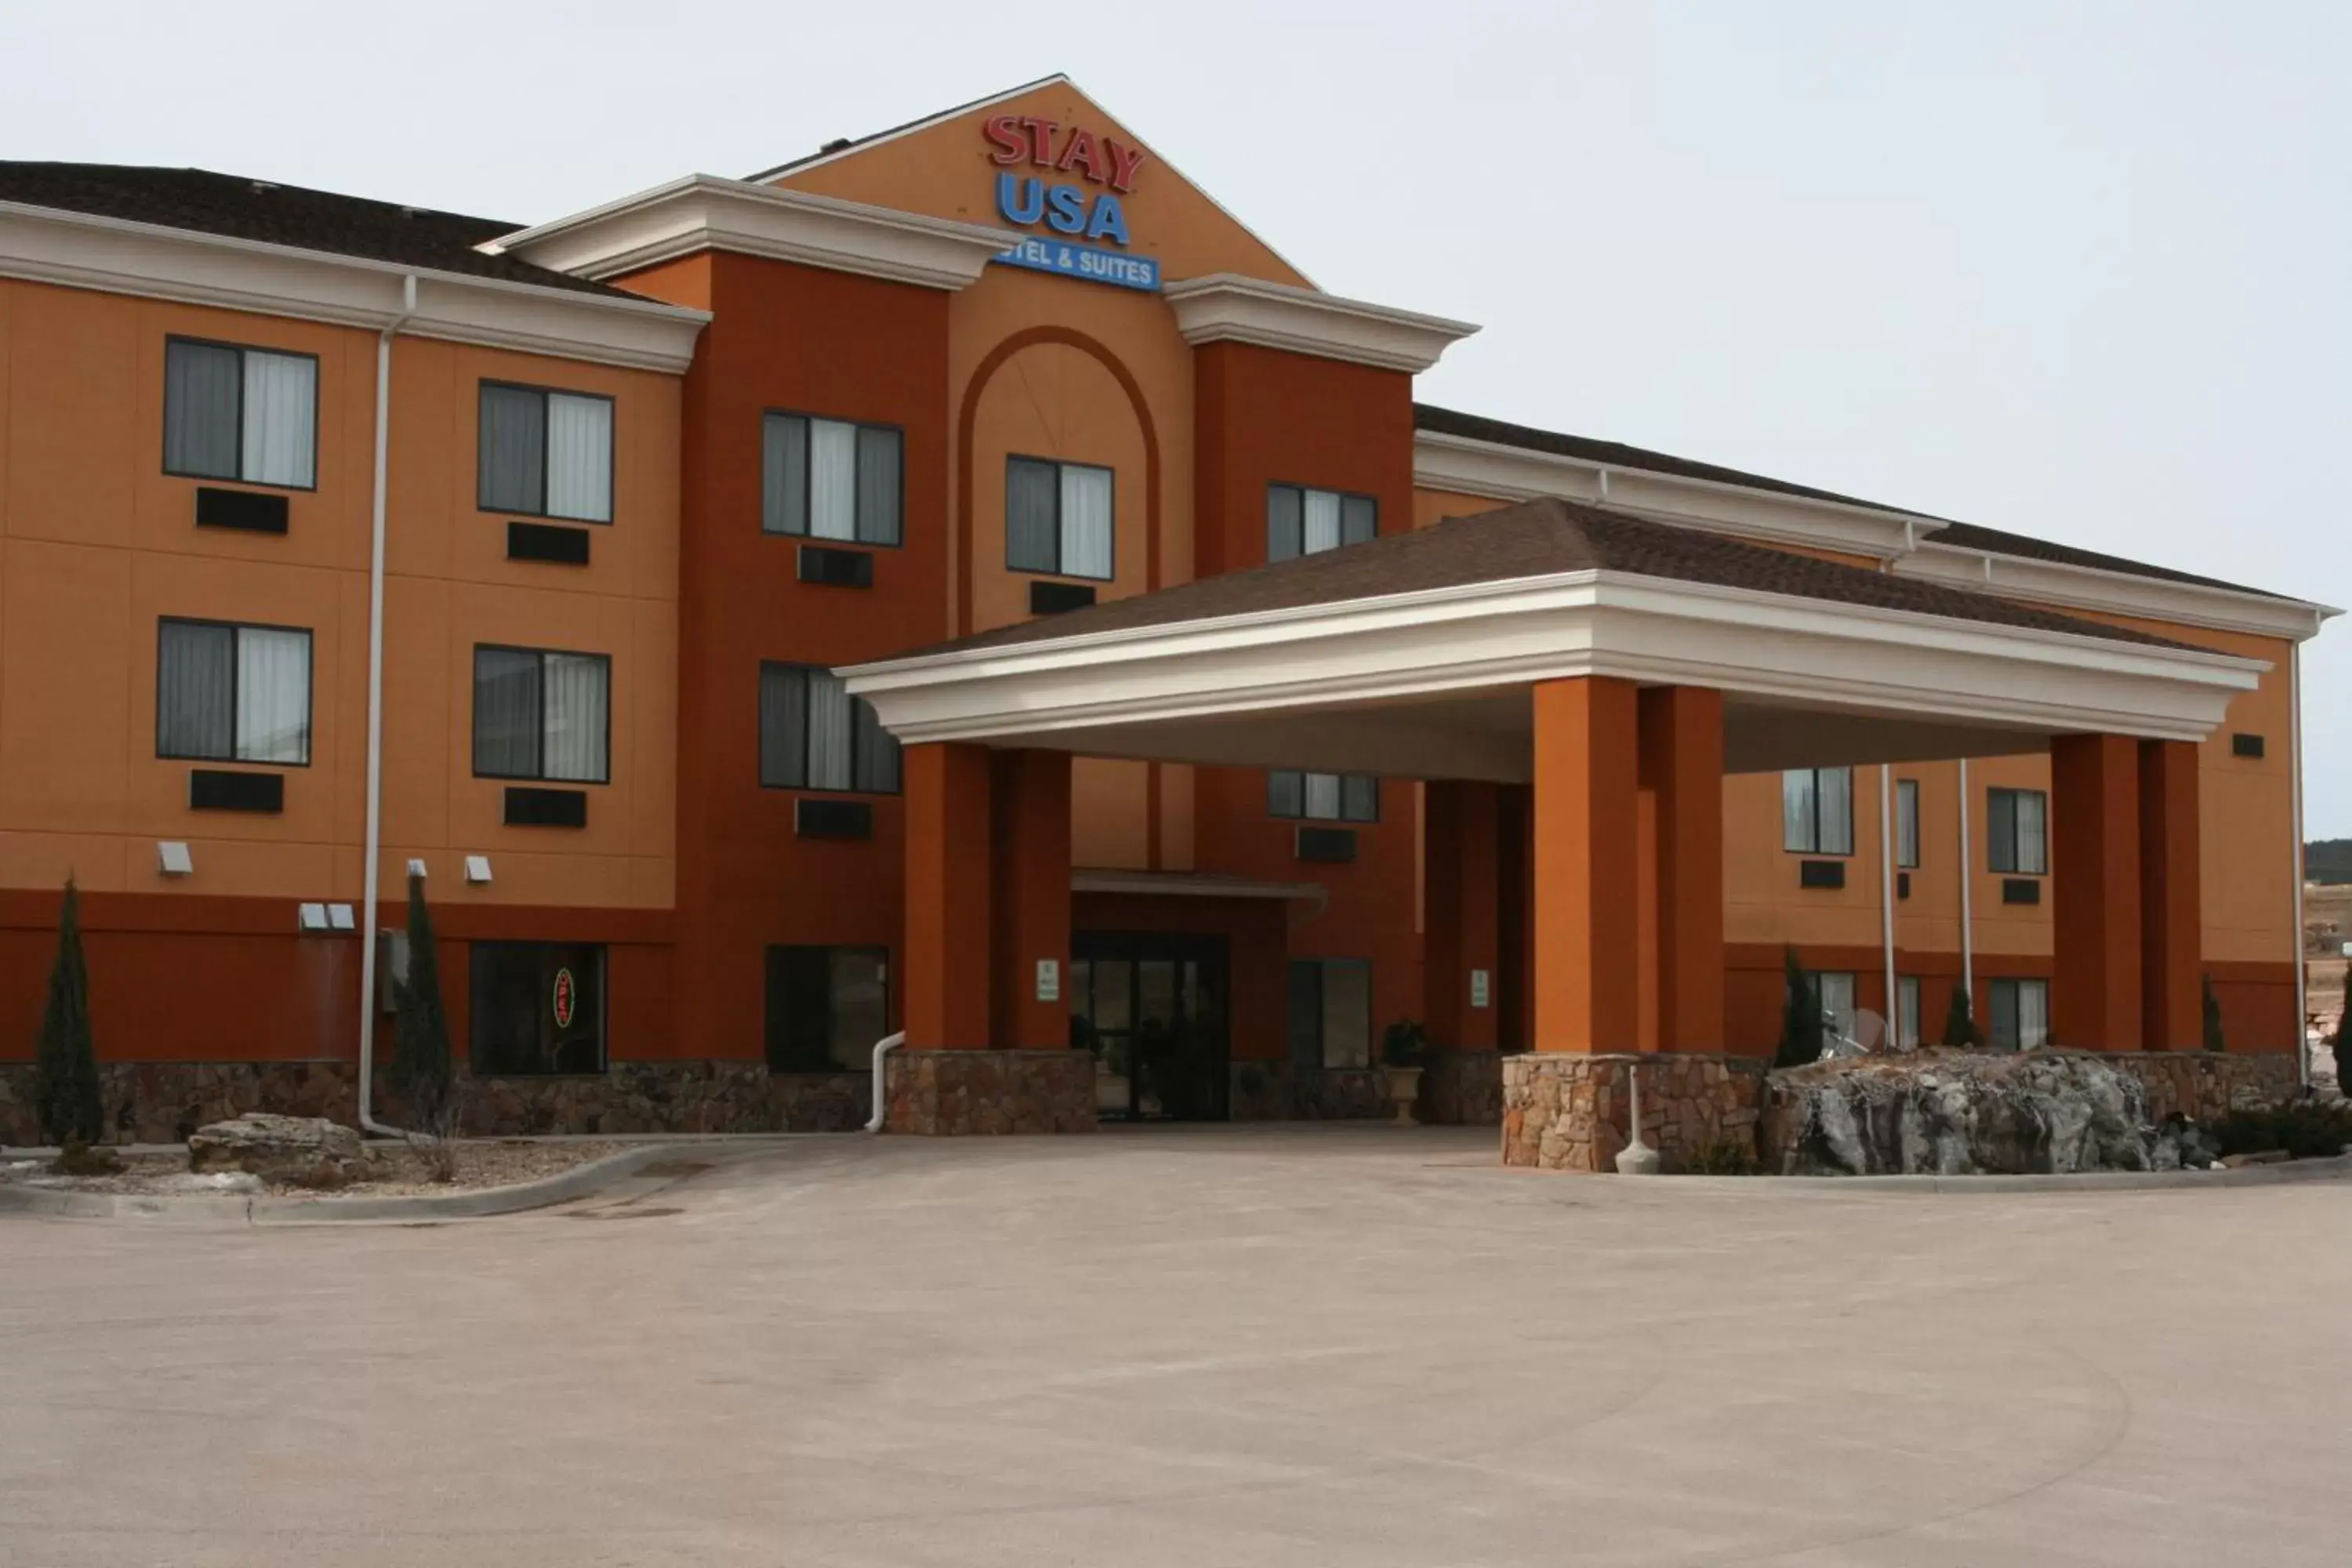 Facade/entrance, Property Building in Stay USA Hotel and Suites